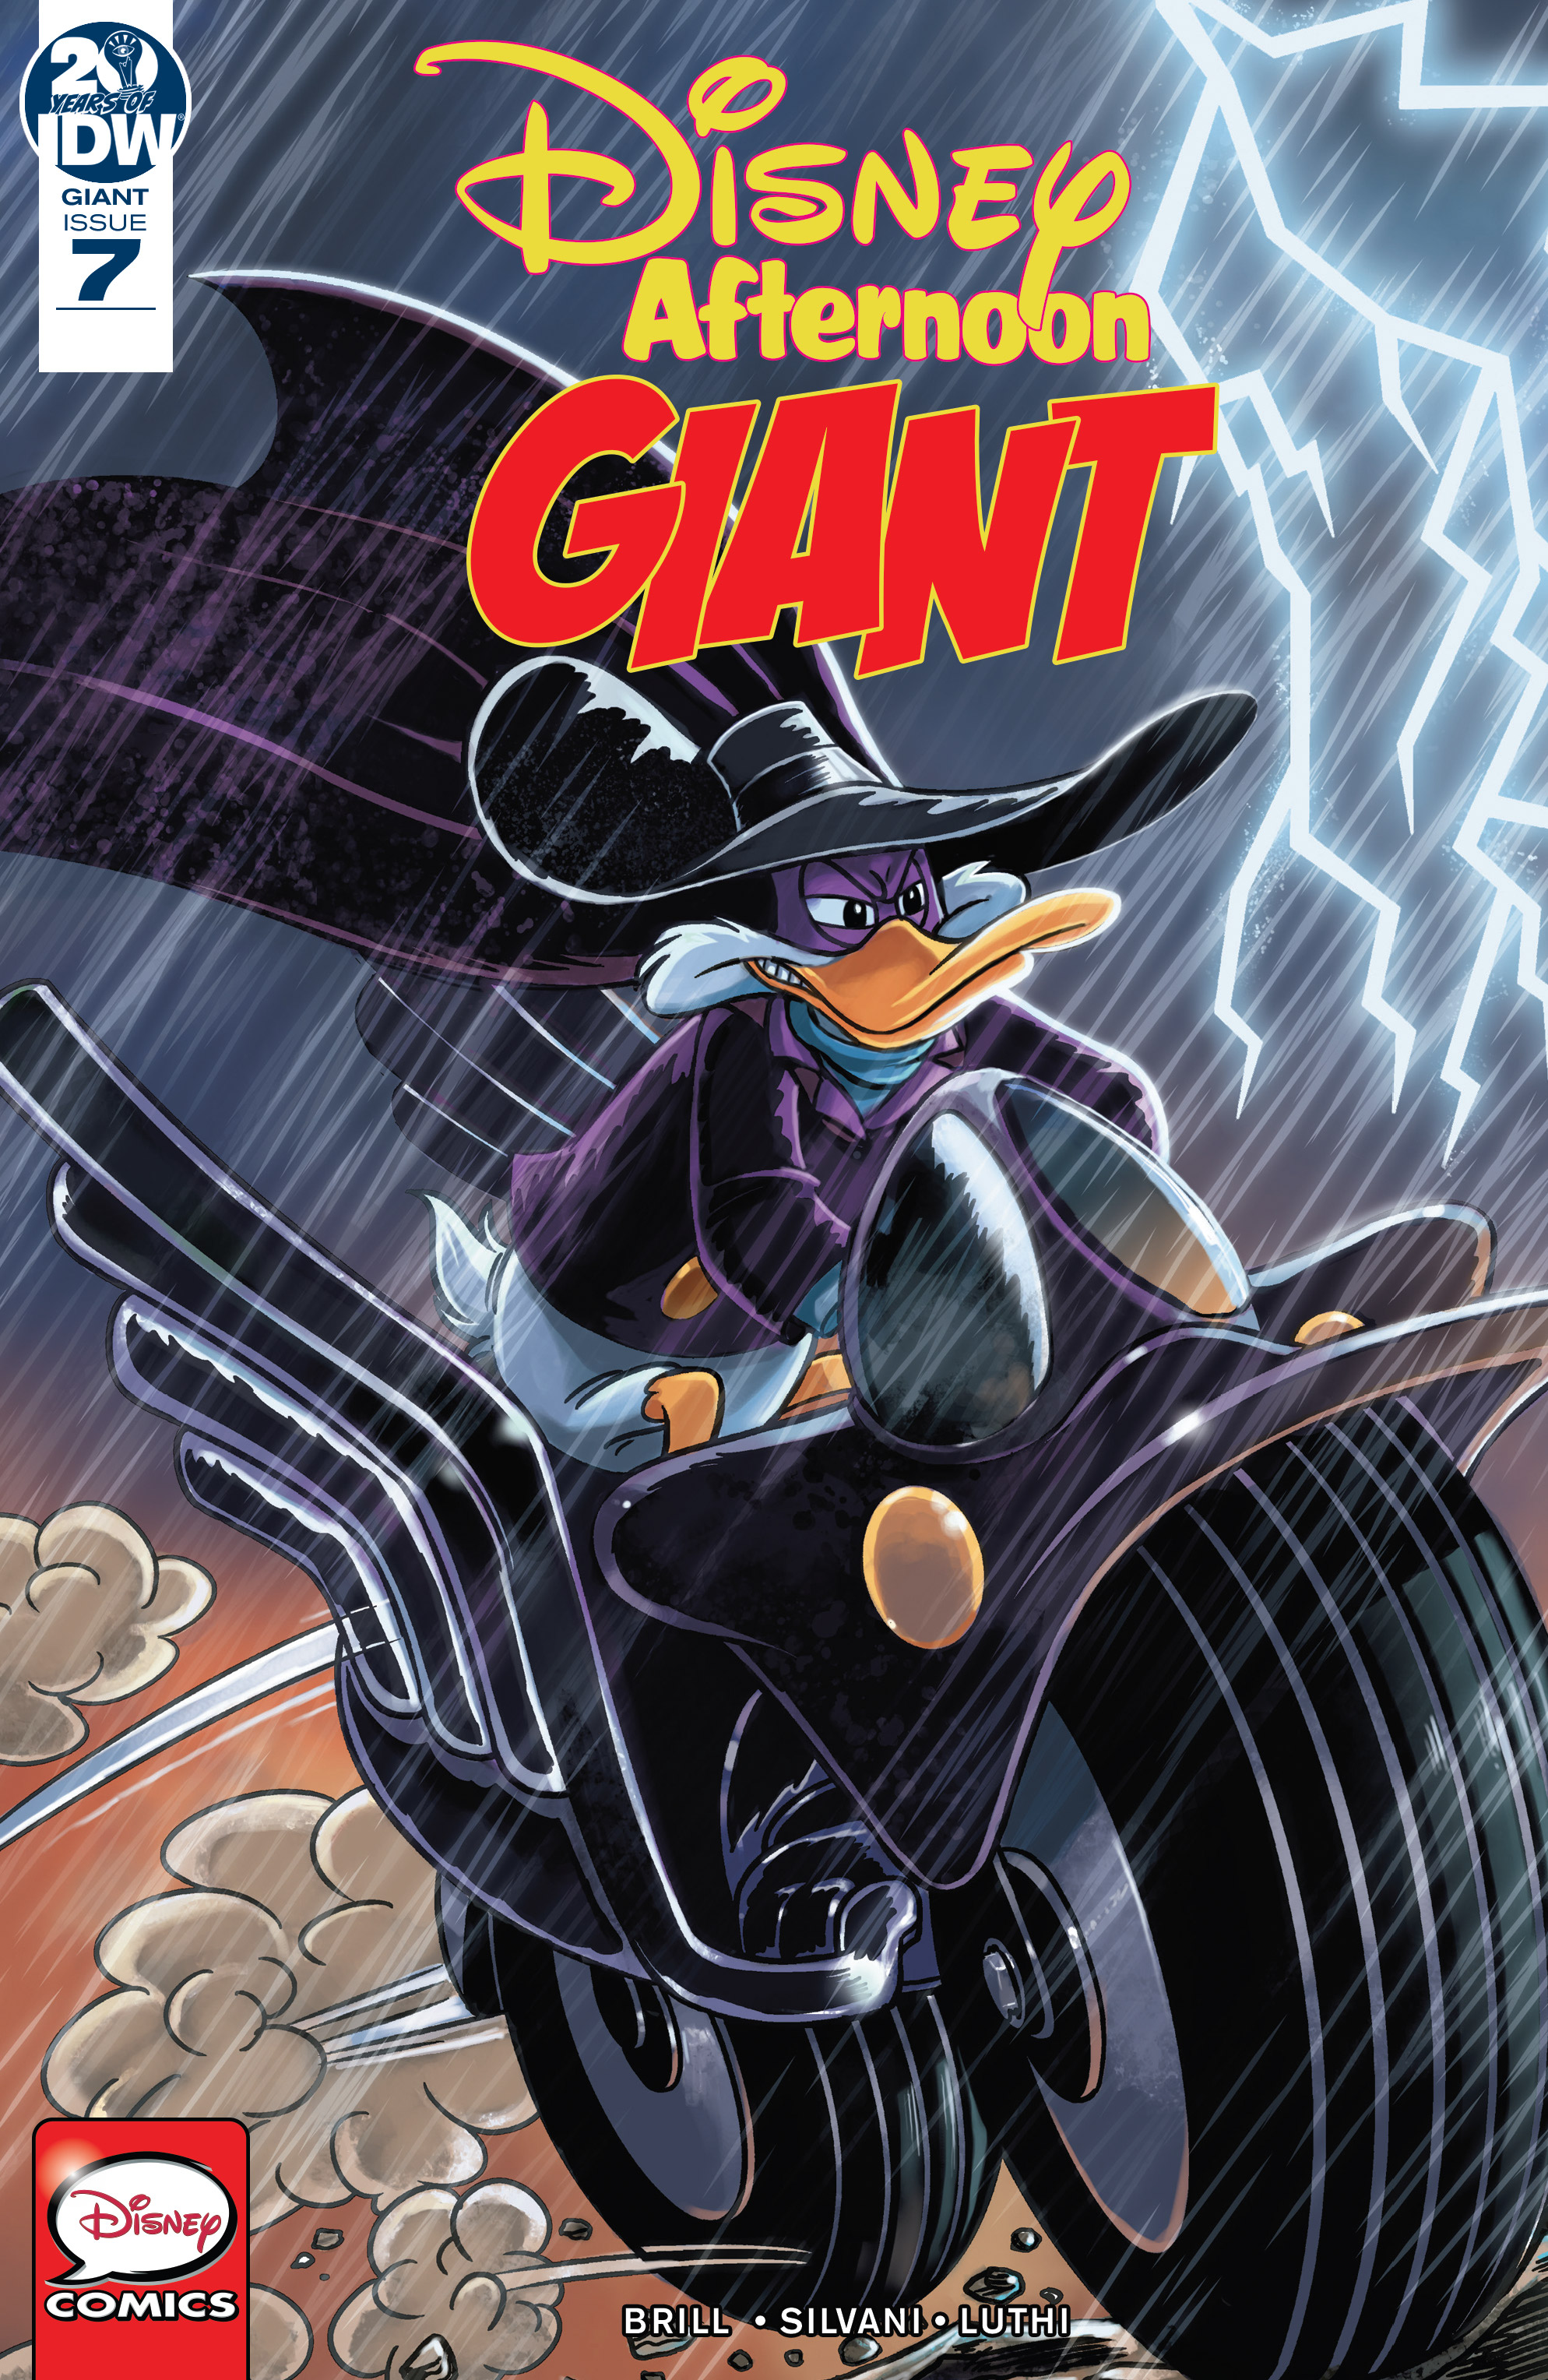 Read online Disney Afternoon Giant comic -  Issue #7 - 1